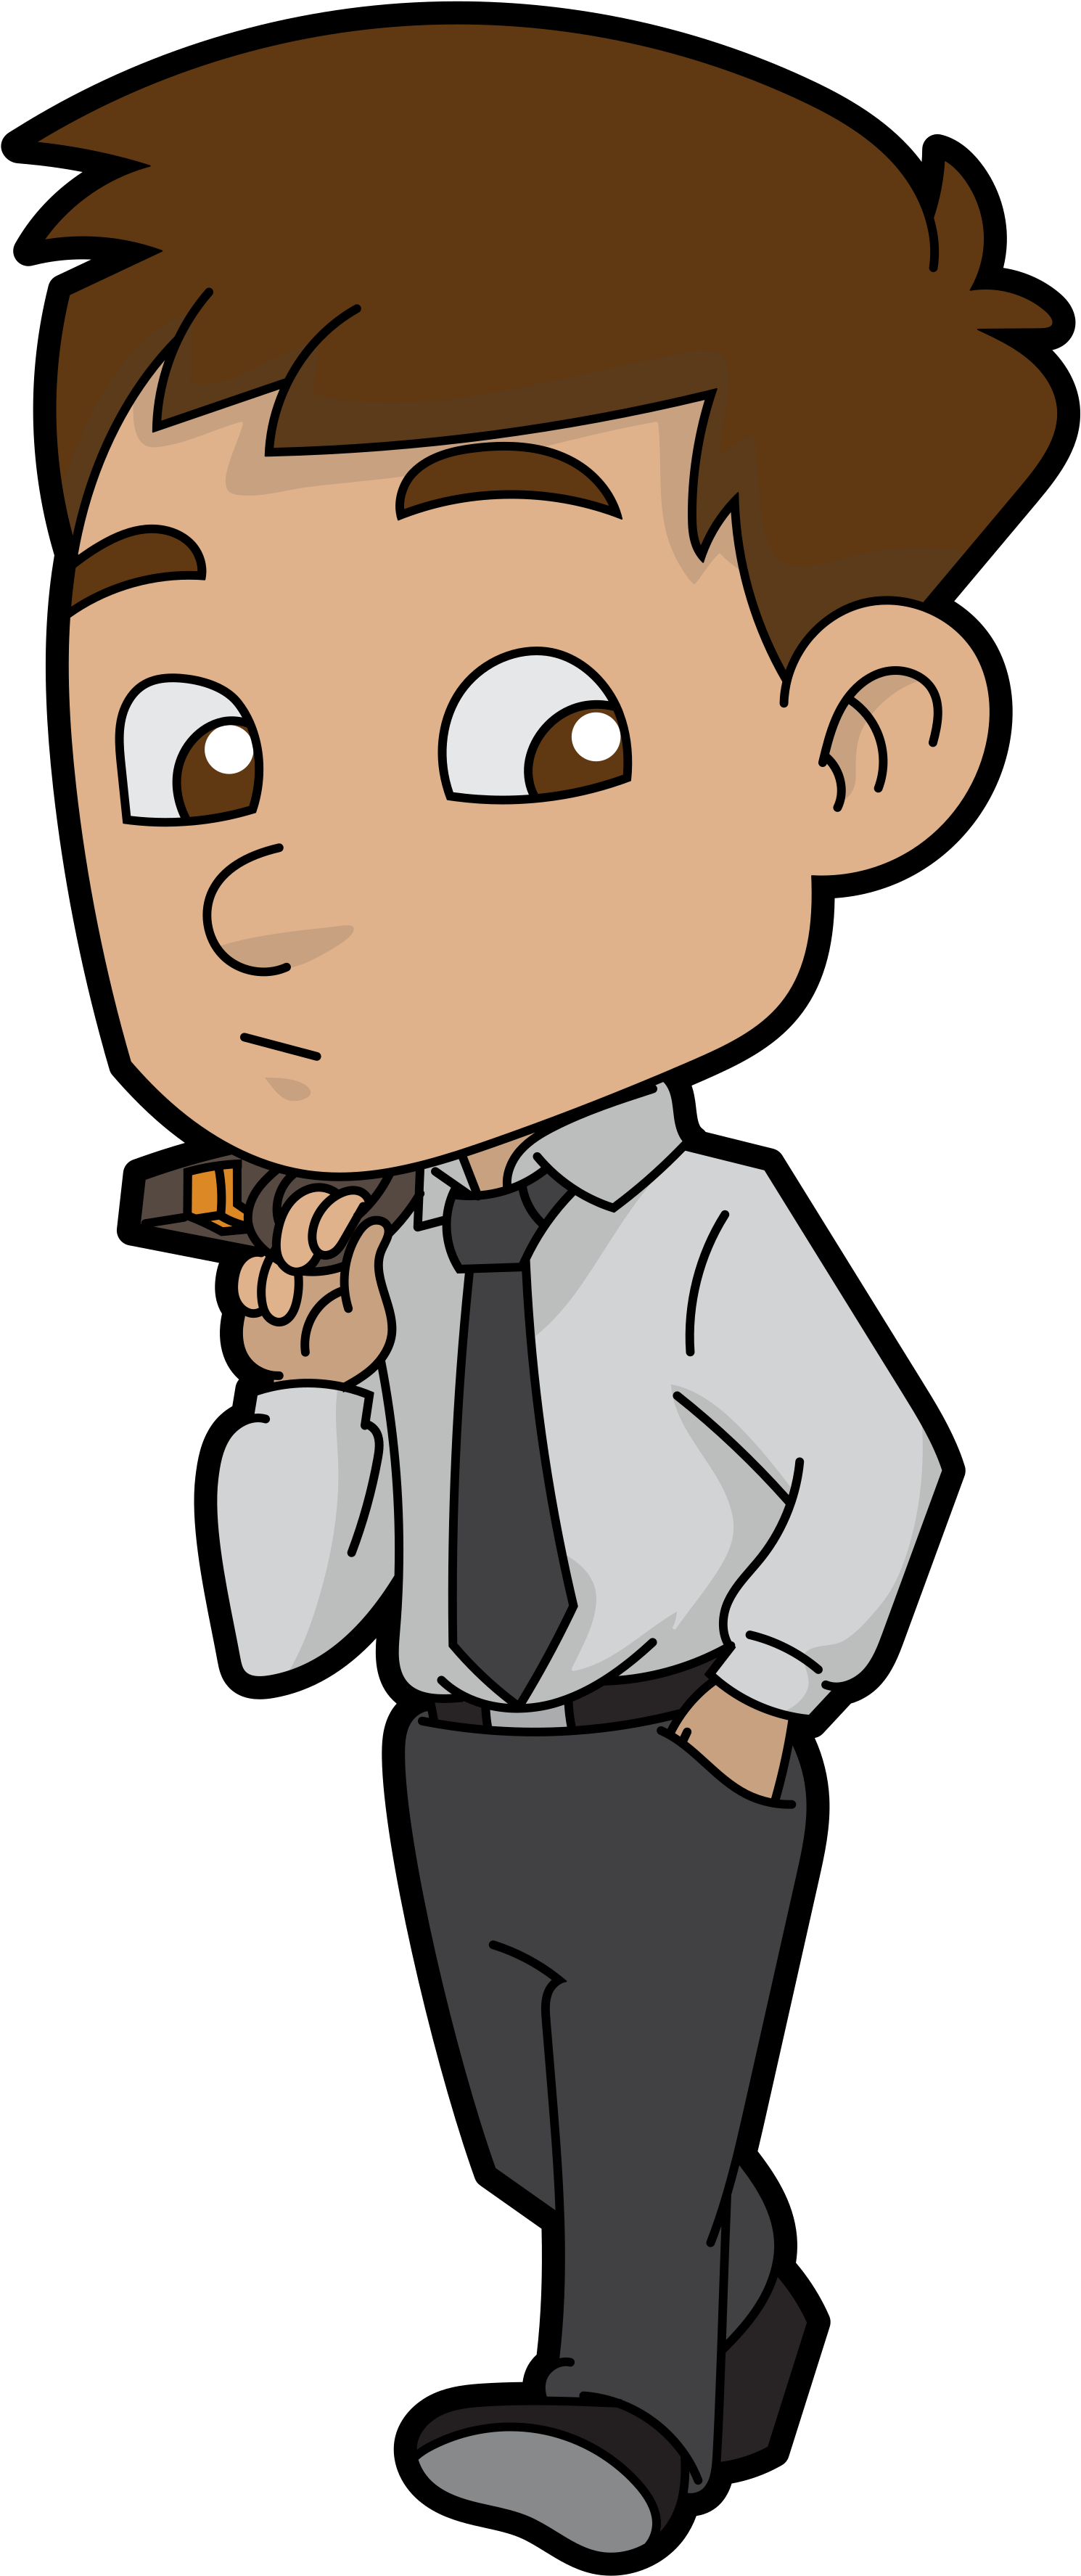 Download Open - Walking Businessman Cartoon PNG Image with No Background -  